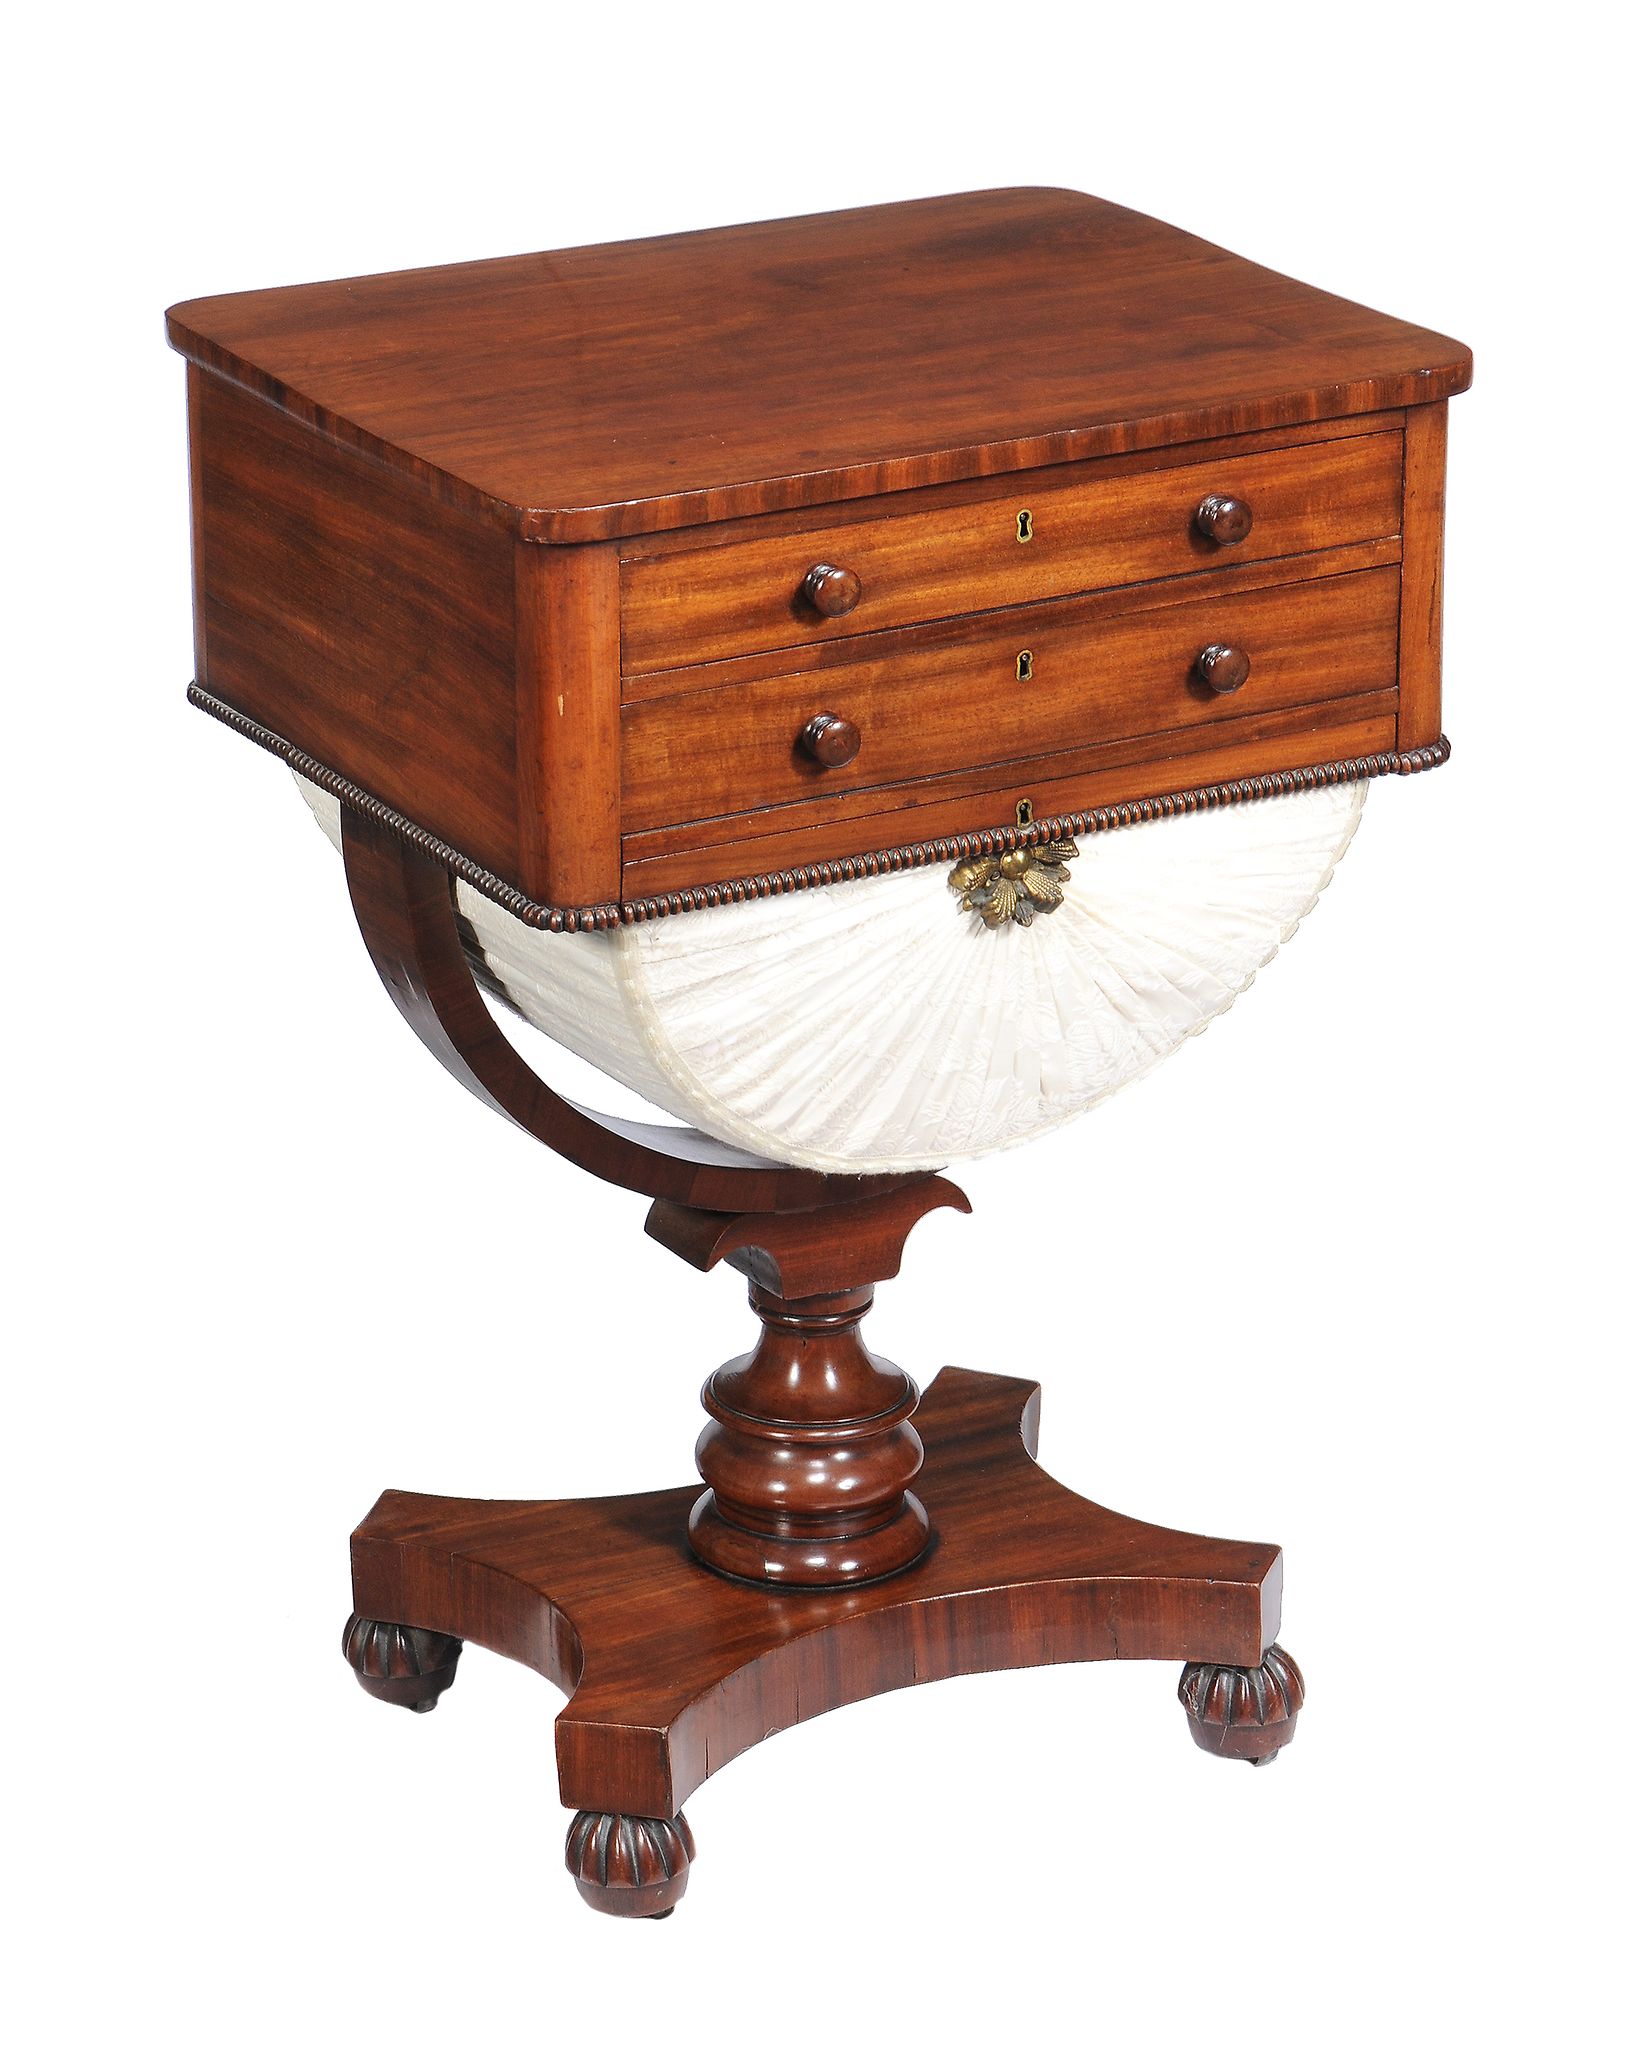 A William IV mahogany work table, circa 1835, the top drawer with a divided interior, 69cm high,